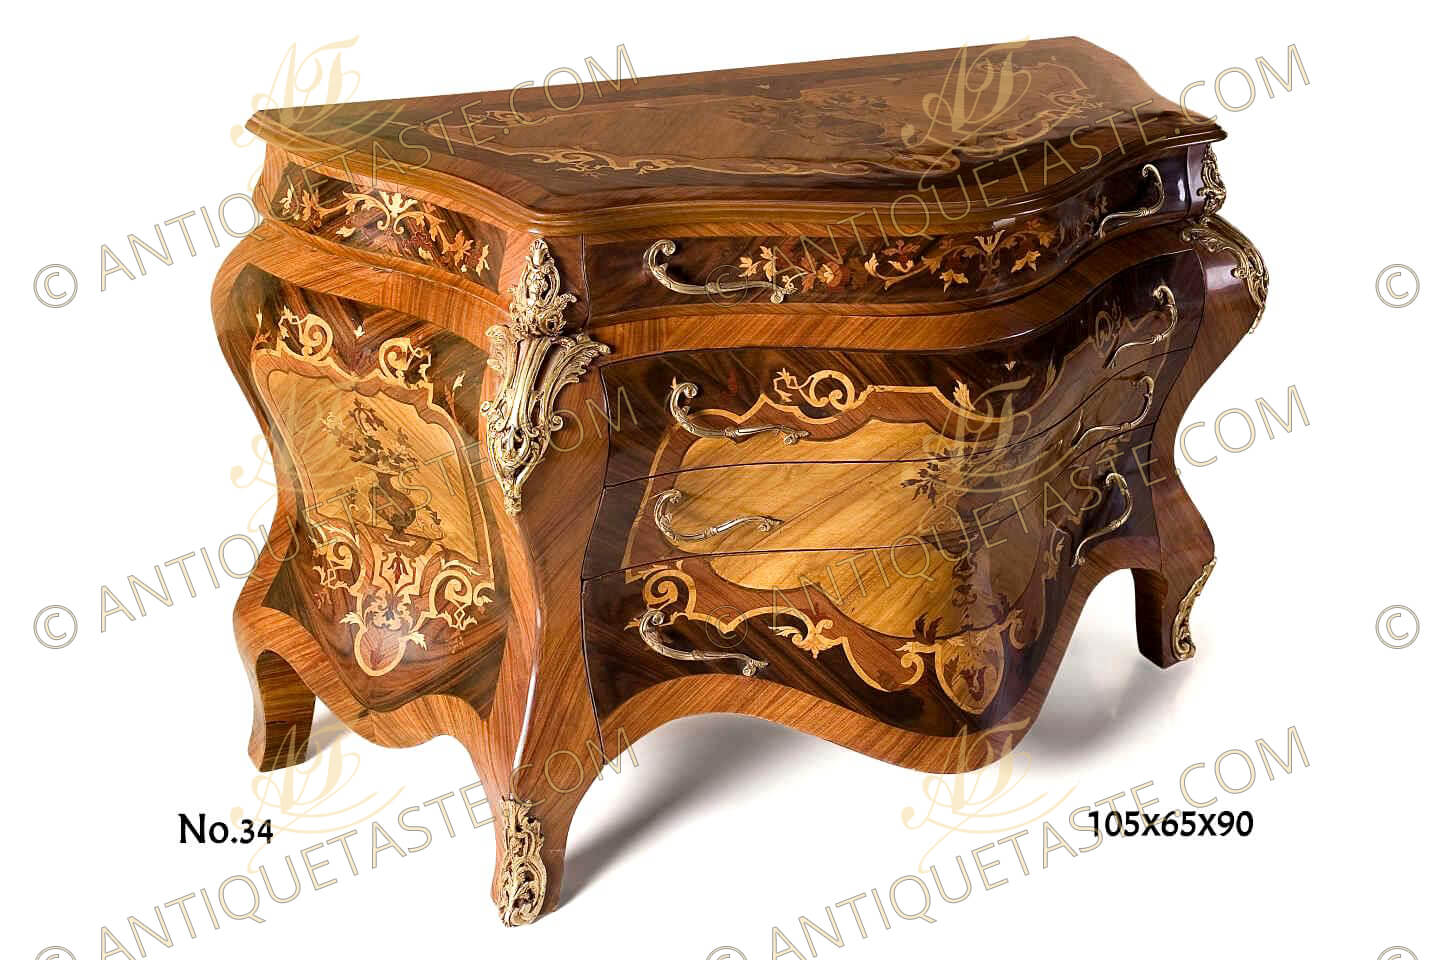 French Louis XV style ormolu-mounted exotic marquetry and veneer inlaid Bombé shaped four drawers Commode